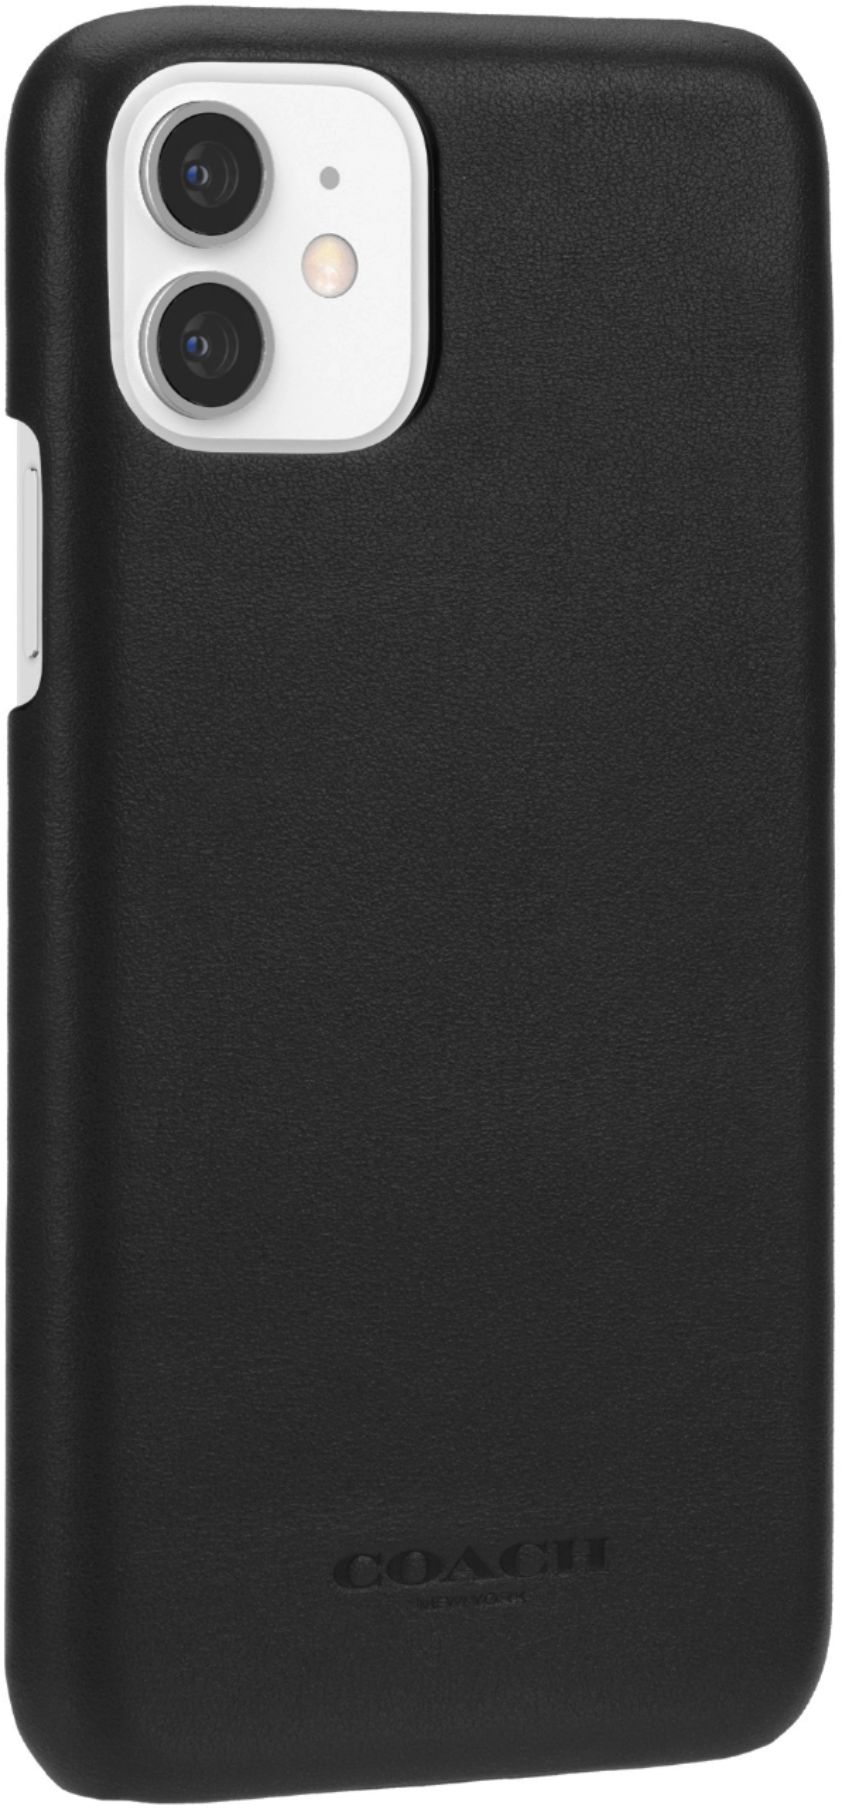 Best Buy: Coach Leather Slim Protective Case for iPhone 12 and 